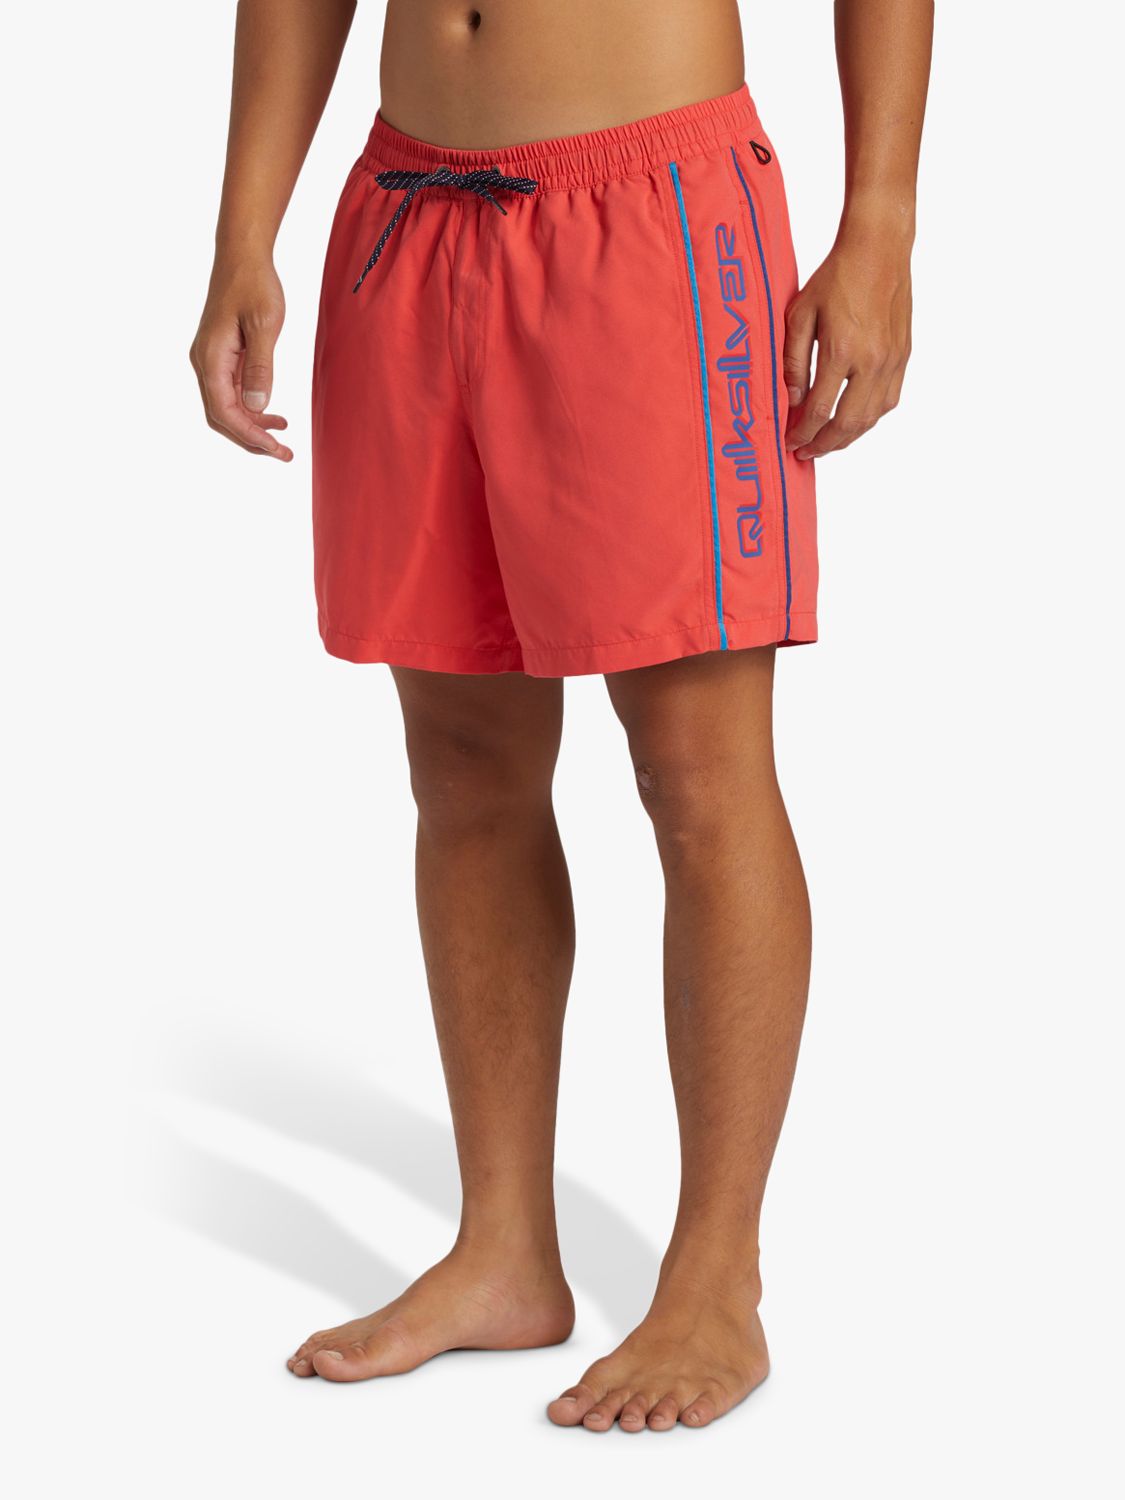 Quiksilver Everyday Collection Recycled Swim Shorts, Cayenne, L